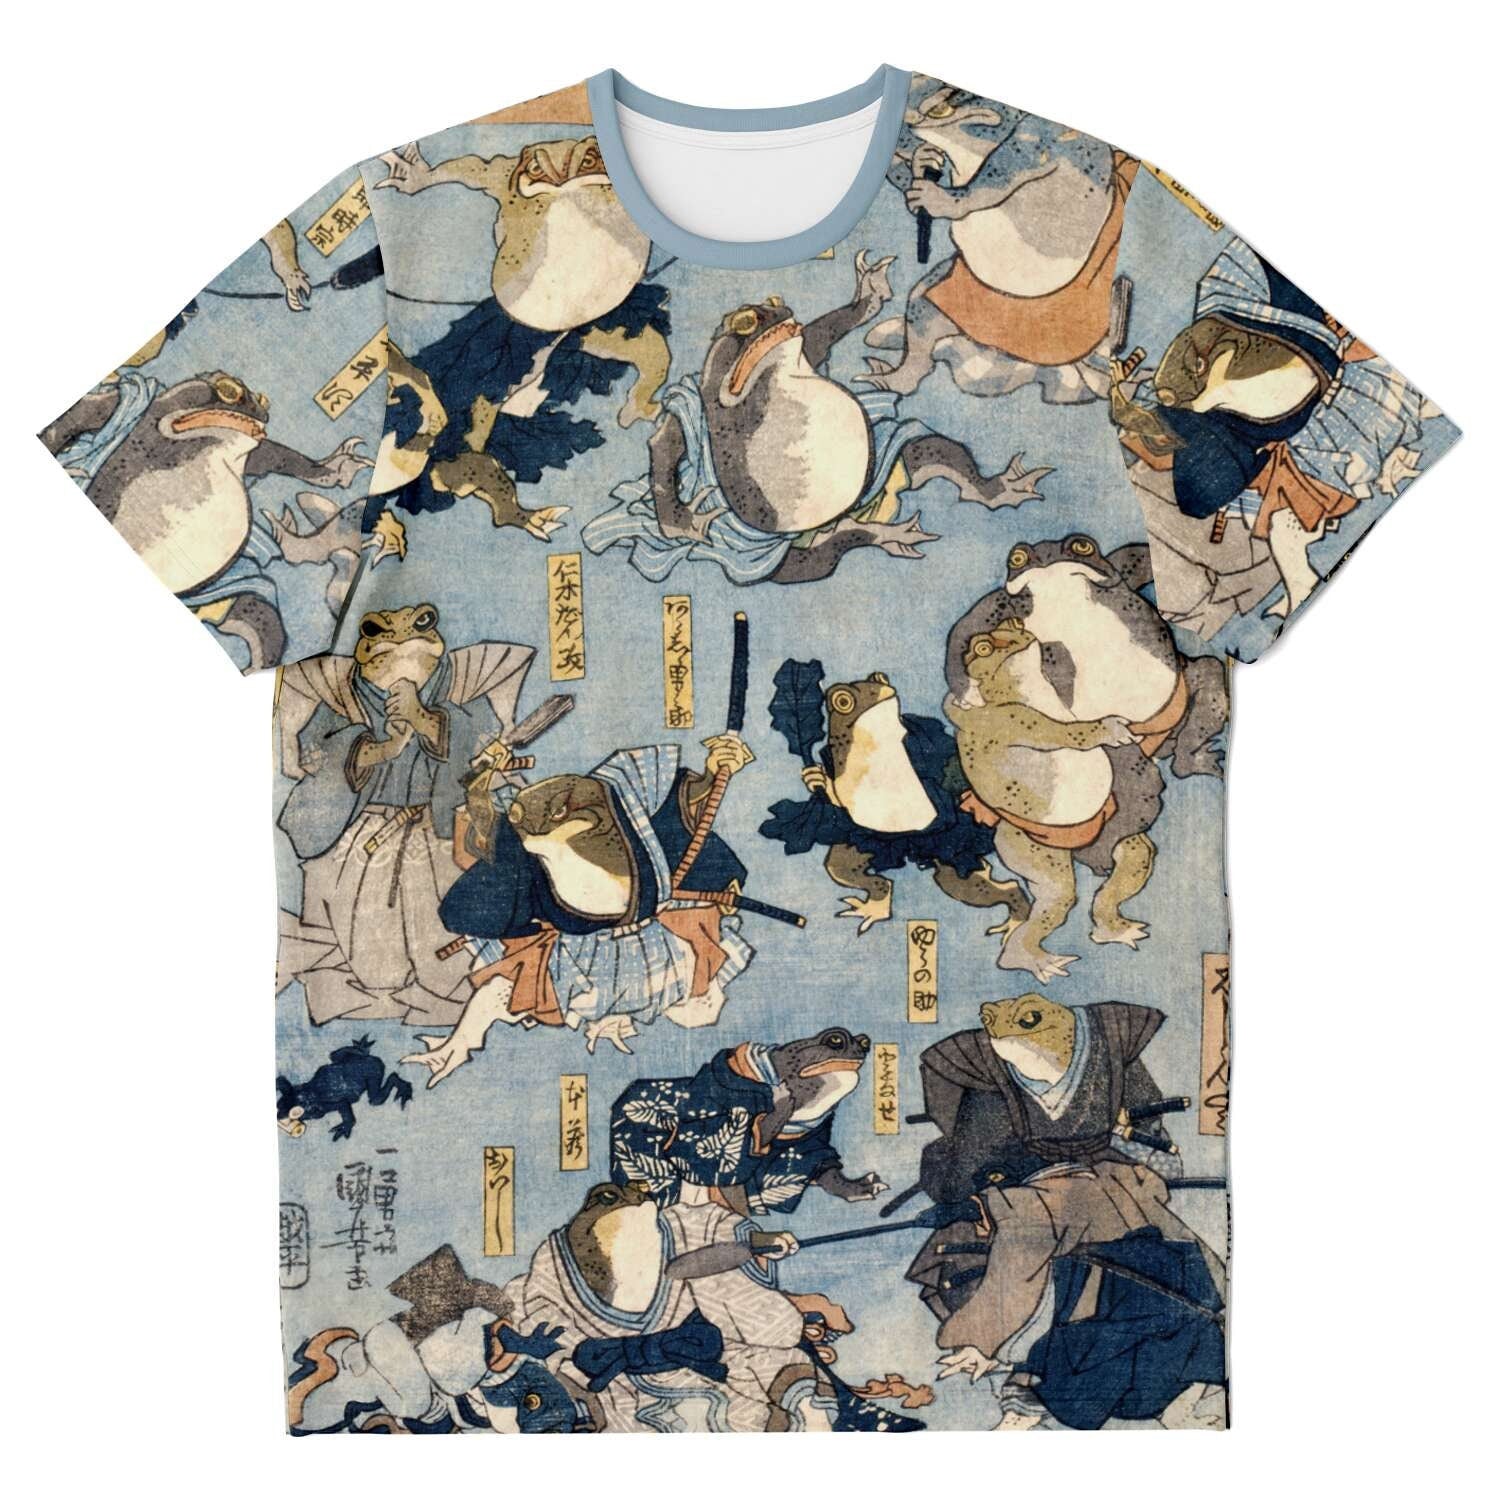 T-shirt Utagawa, Kuniyoshi: Famous Heroes of the Kabuki Stage Played by Frogs Toads Funny Antique Kawaii Vintage Japanese Graphic Art Tee T-Shirt